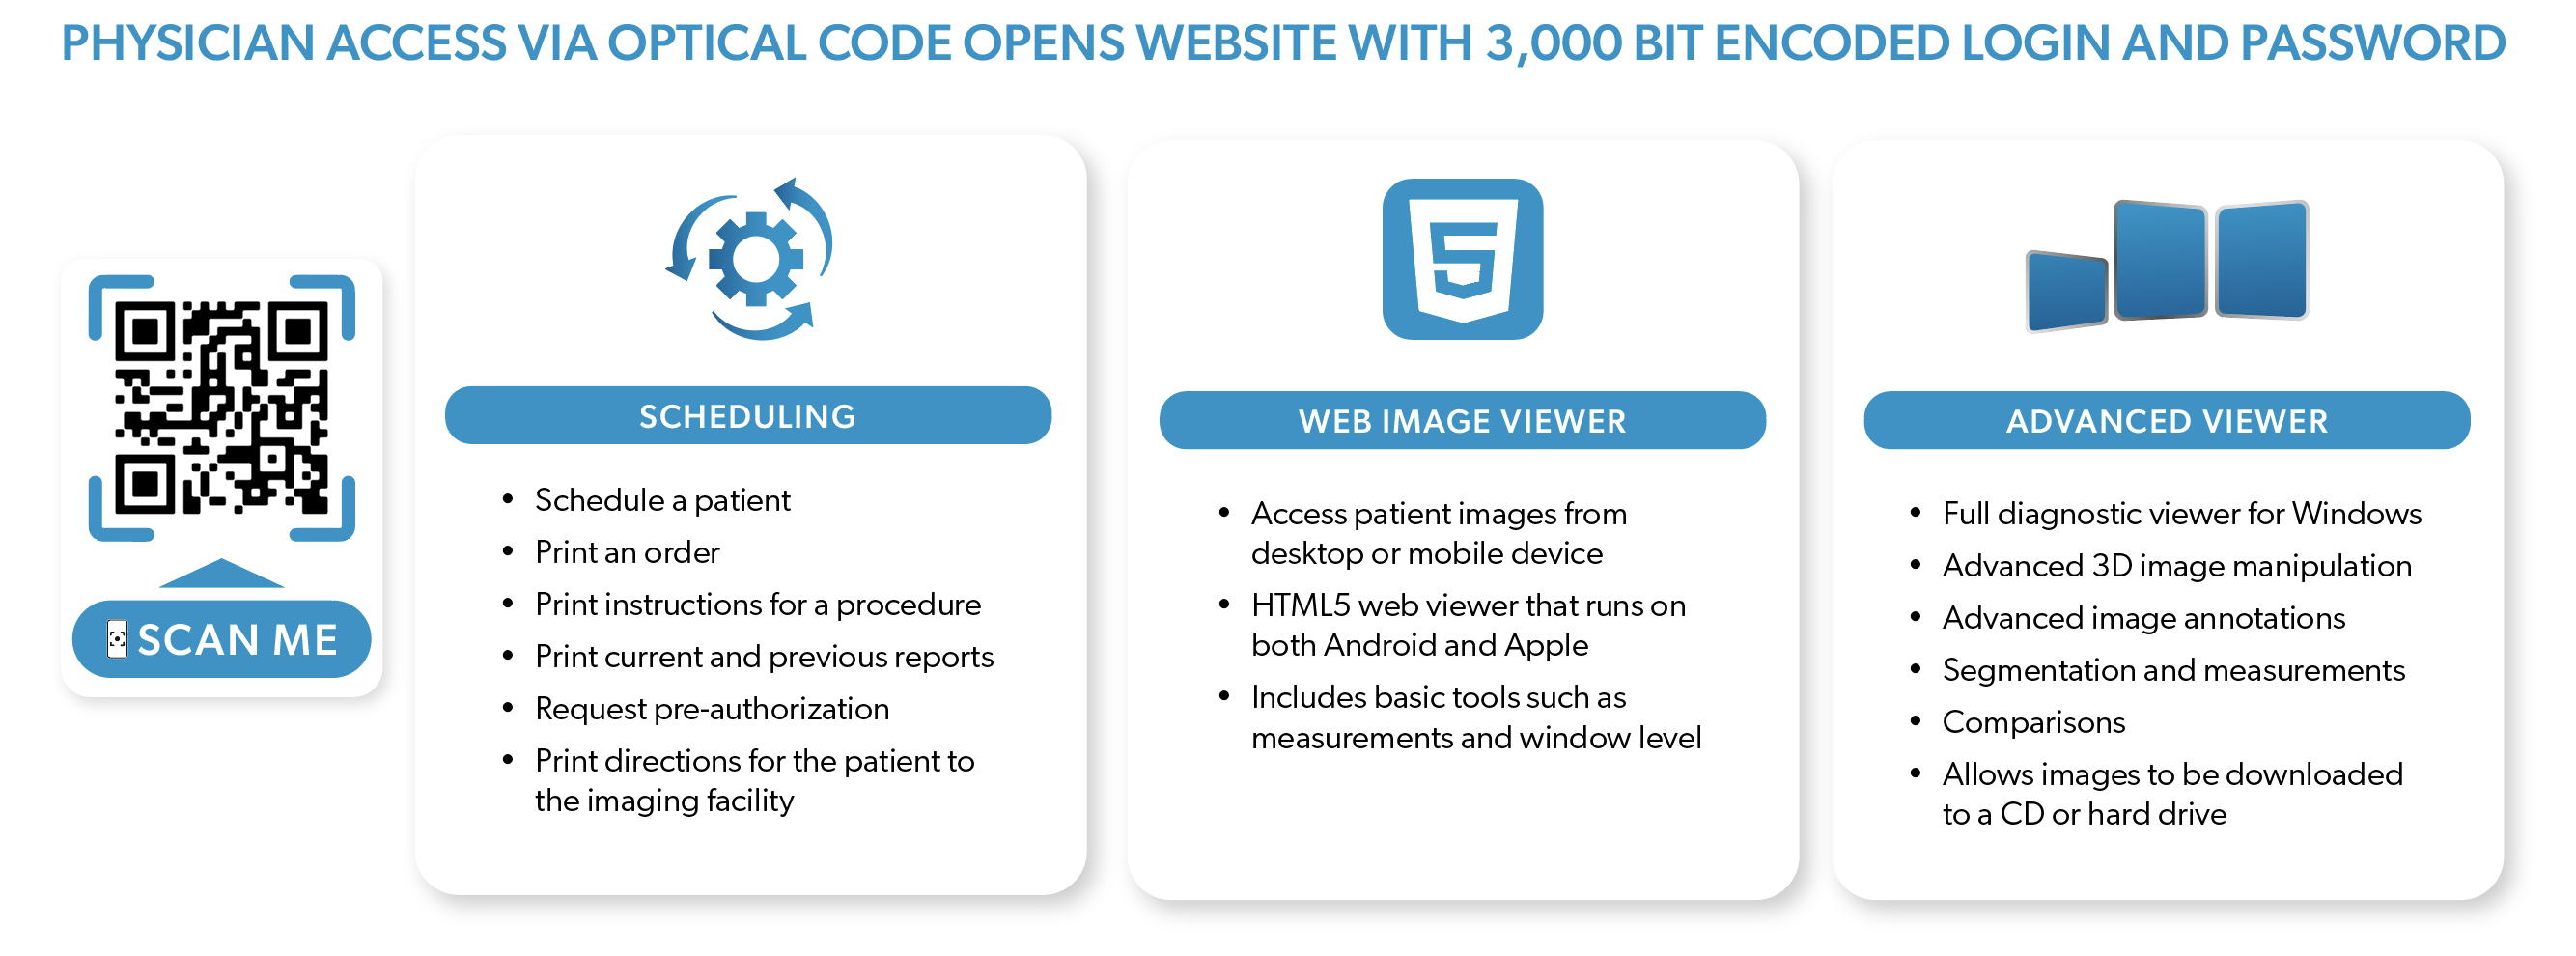 Physician Access with QR Code Graphic